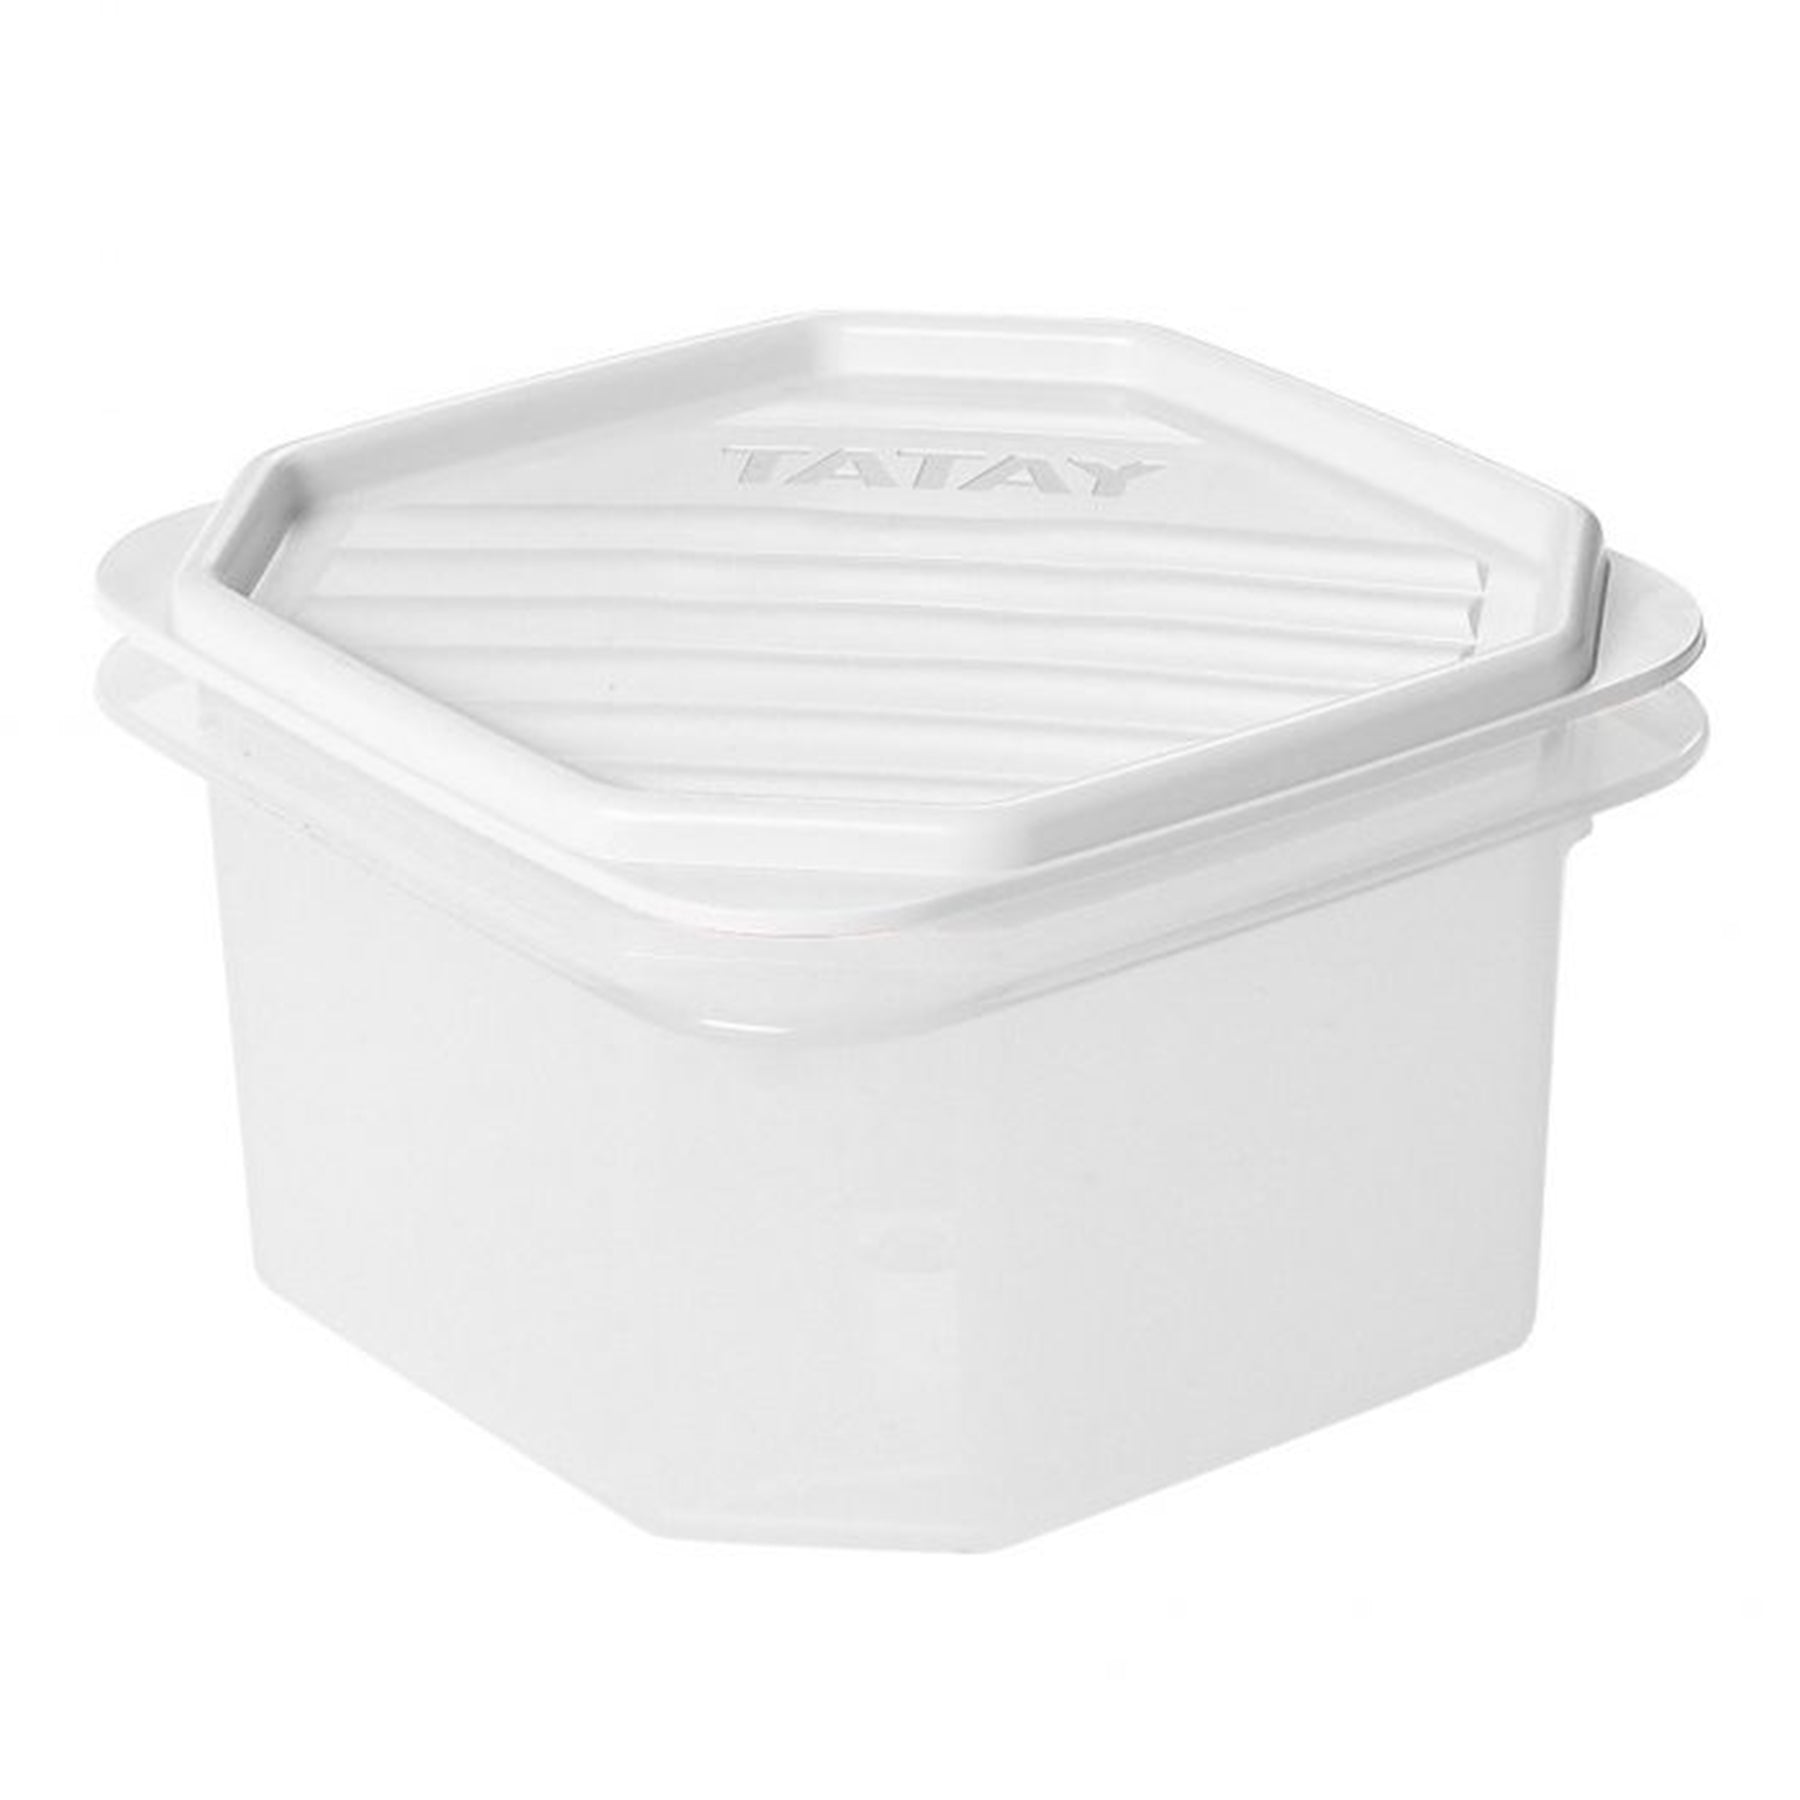 Food container TOP FLEX - white